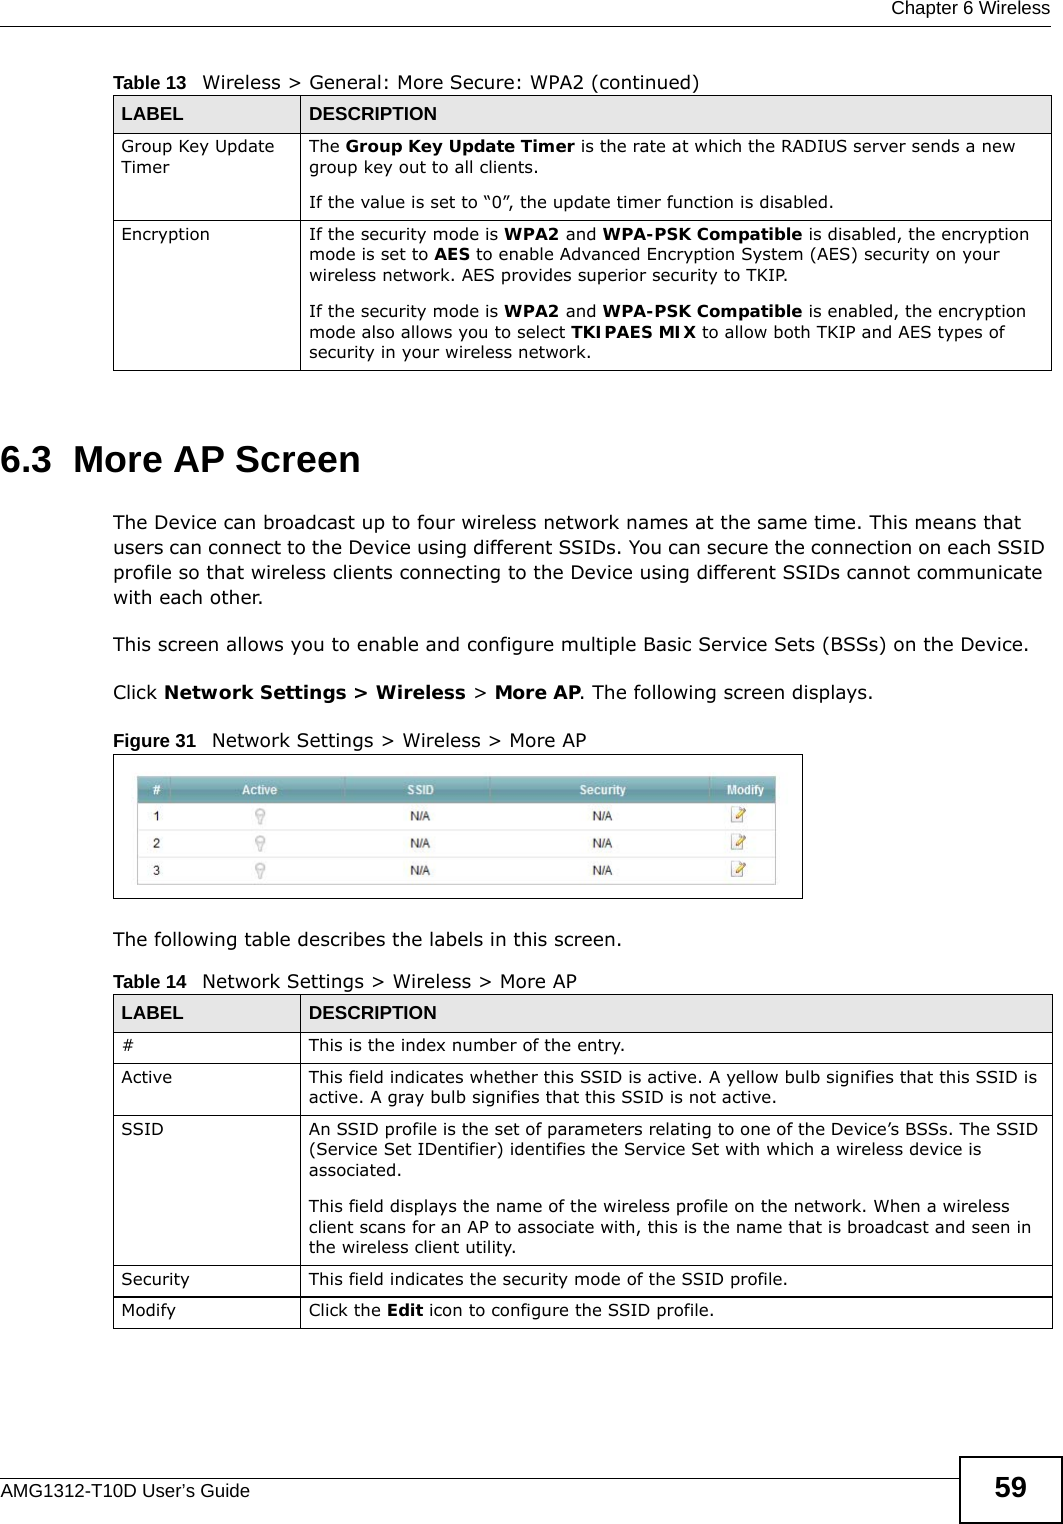  Chapter 6 WirelessAMG1312-T10D User’s Guide 596.3  More AP ScreenThe Device can broadcast up to four wireless network names at the same time. This means that users can connect to the Device using different SSIDs. You can secure the connection on each SSID profile so that wireless clients connecting to the Device using different SSIDs cannot communicate with each other.This screen allows you to enable and configure multiple Basic Service Sets (BSSs) on the Device.Click Network Settings &gt; Wireless &gt; More AP. The following screen displays.Figure 31   Network Settings &gt; Wireless &gt; More APThe following table describes the labels in this screen.Group Key Update TimerThe Group Key Update Timer is the rate at which the RADIUS server sends a new group key out to all clients. If the value is set to “0”, the update timer function is disabled.Encryption If the security mode is WPA2 and WPA-PSK Compatible is disabled, the encryption mode is set to AES to enable Advanced Encryption System (AES) security on your wireless network. AES provides superior security to TKIP.If the security mode is WPA2 and WPA-PSK Compatible is enabled, the encryption mode also allows you to select TKIPAES MIX to allow both TKIP and AES types of security in your wireless network.Table 13   Wireless &gt; General: More Secure: WPA2 (continued)LABEL DESCRIPTIONTable 14   Network Settings &gt; Wireless &gt; More APLABEL DESCRIPTION# This is the index number of the entry. Active This field indicates whether this SSID is active. A yellow bulb signifies that this SSID is active. A gray bulb signifies that this SSID is not active.SSID An SSID profile is the set of parameters relating to one of the Device’s BSSs. The SSID (Service Set IDentifier) identifies the Service Set with which a wireless device is associated. This field displays the name of the wireless profile on the network. When a wireless client scans for an AP to associate with, this is the name that is broadcast and seen in the wireless client utility.Security This field indicates the security mode of the SSID profile.Modify Click the Edit icon to configure the SSID profile.